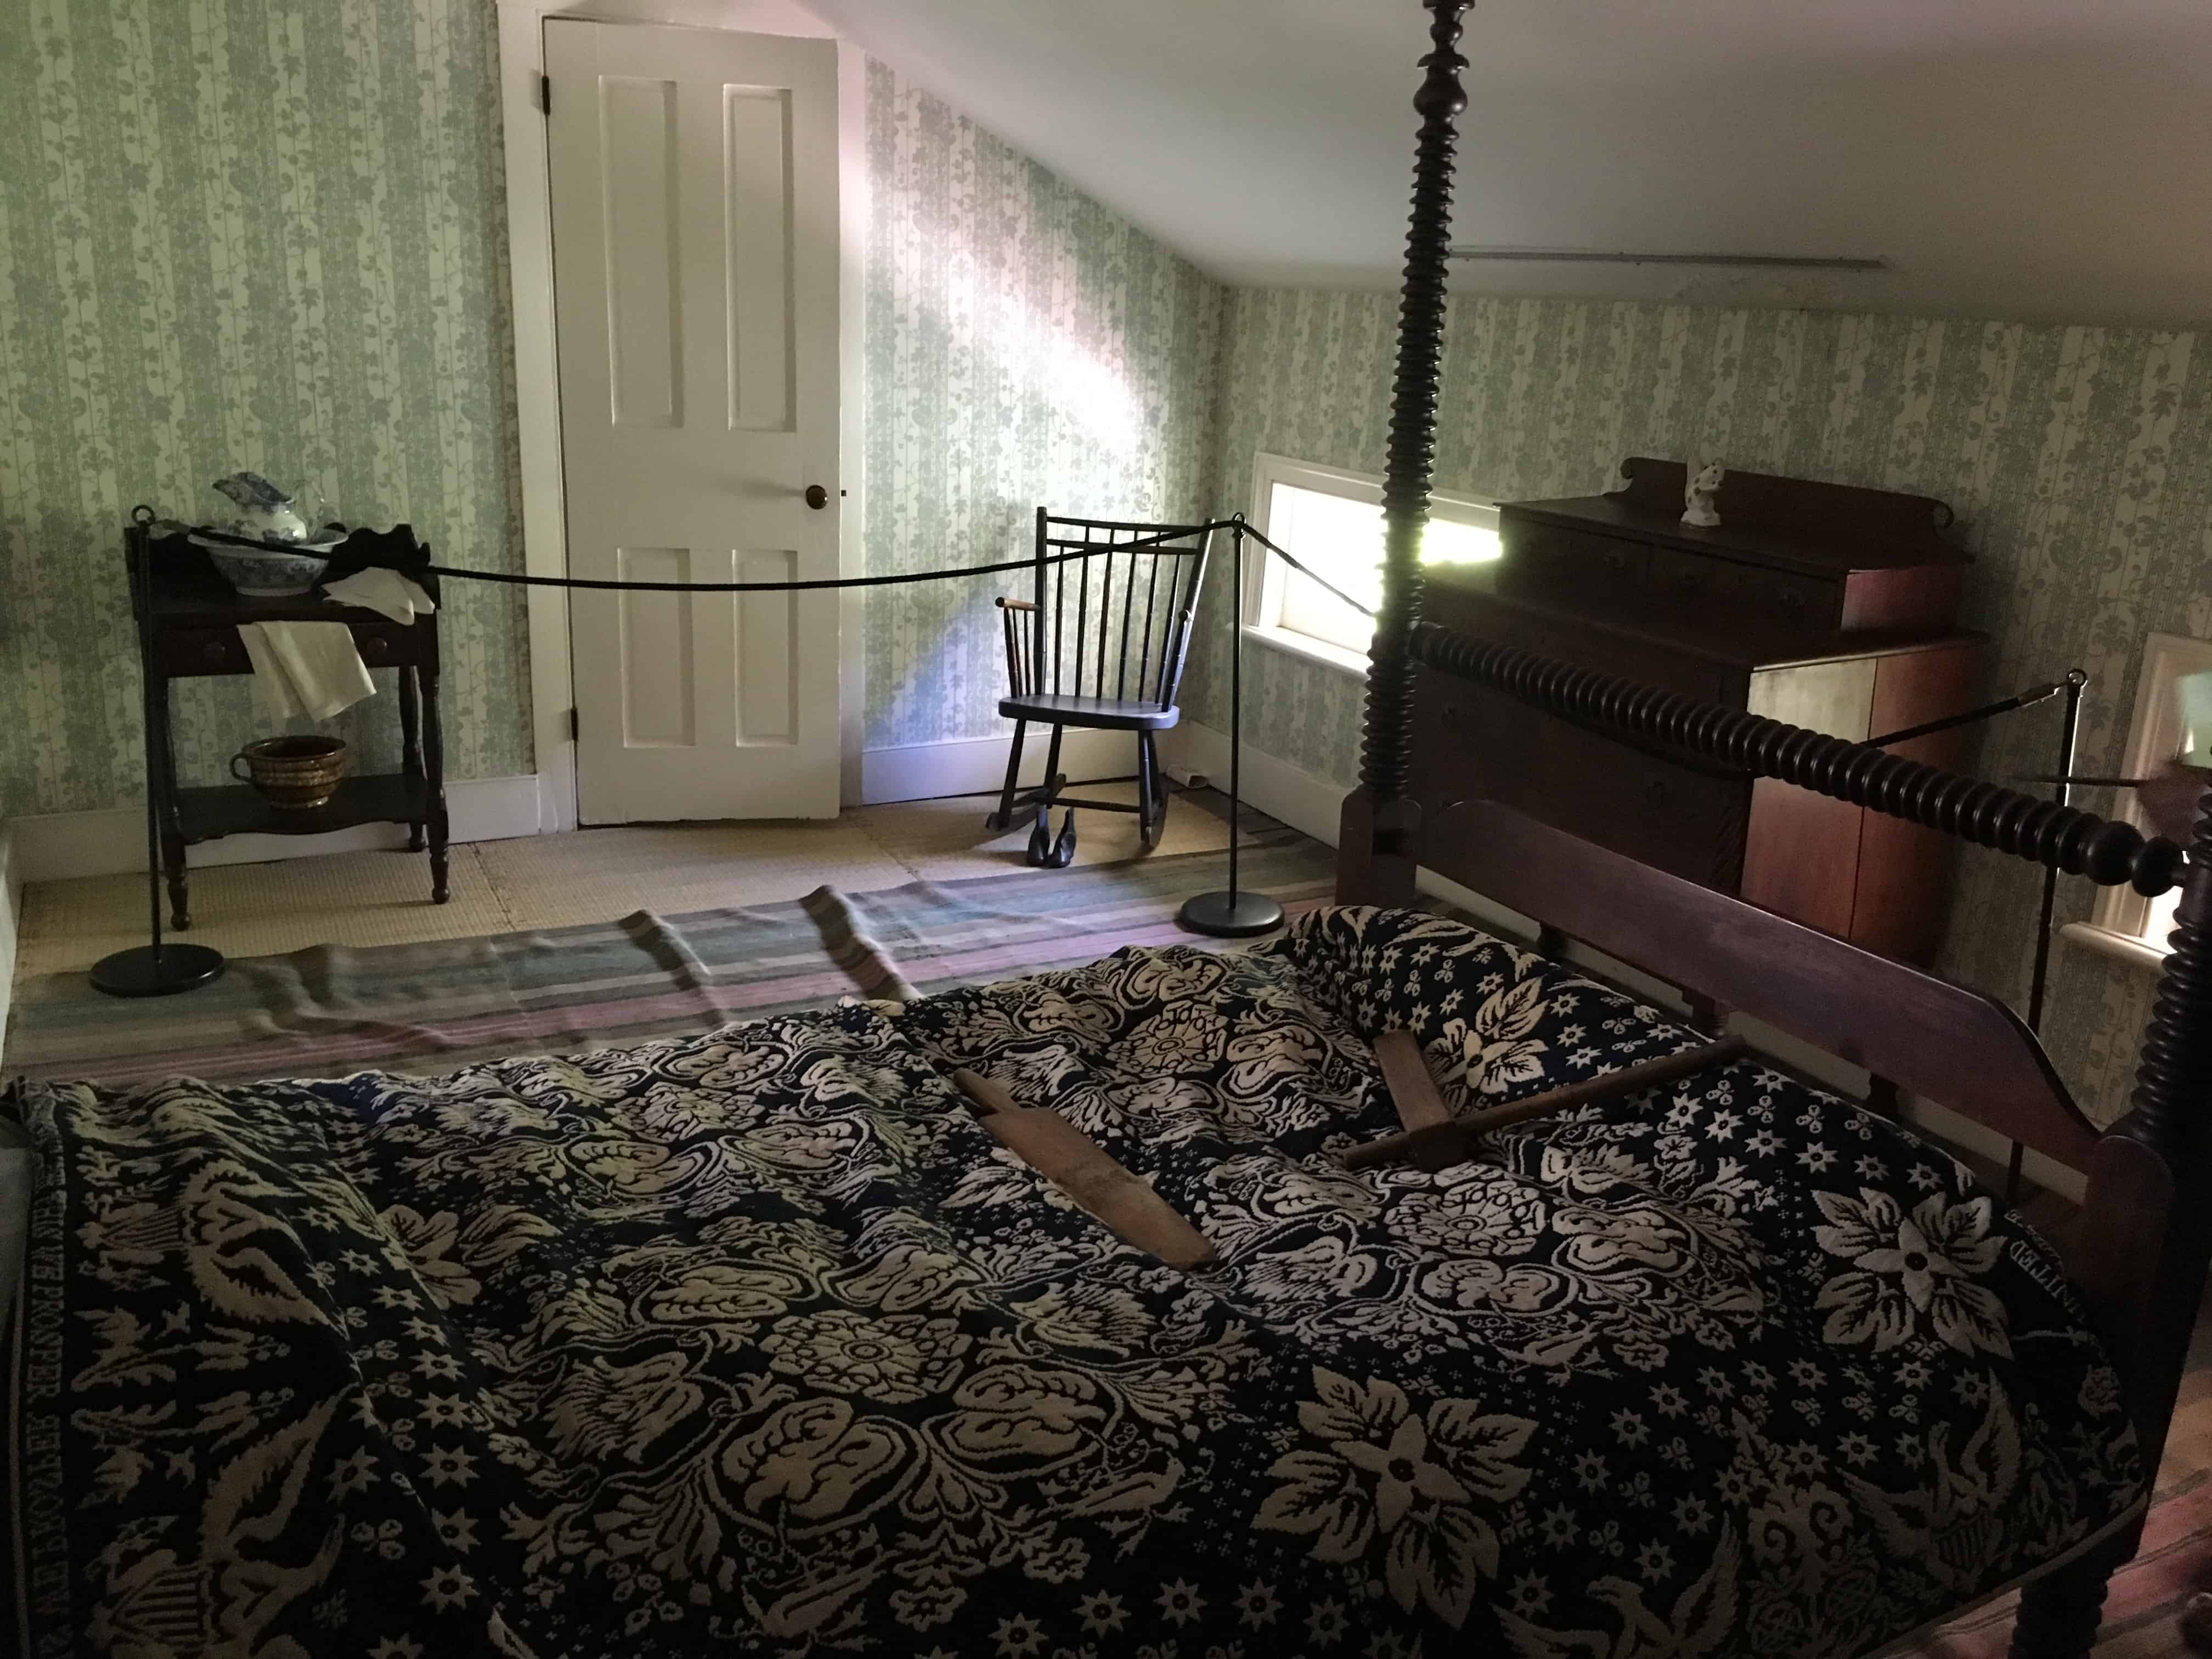 Children's bedroom at the Henry B. Clarke House in Chicago, Illinois